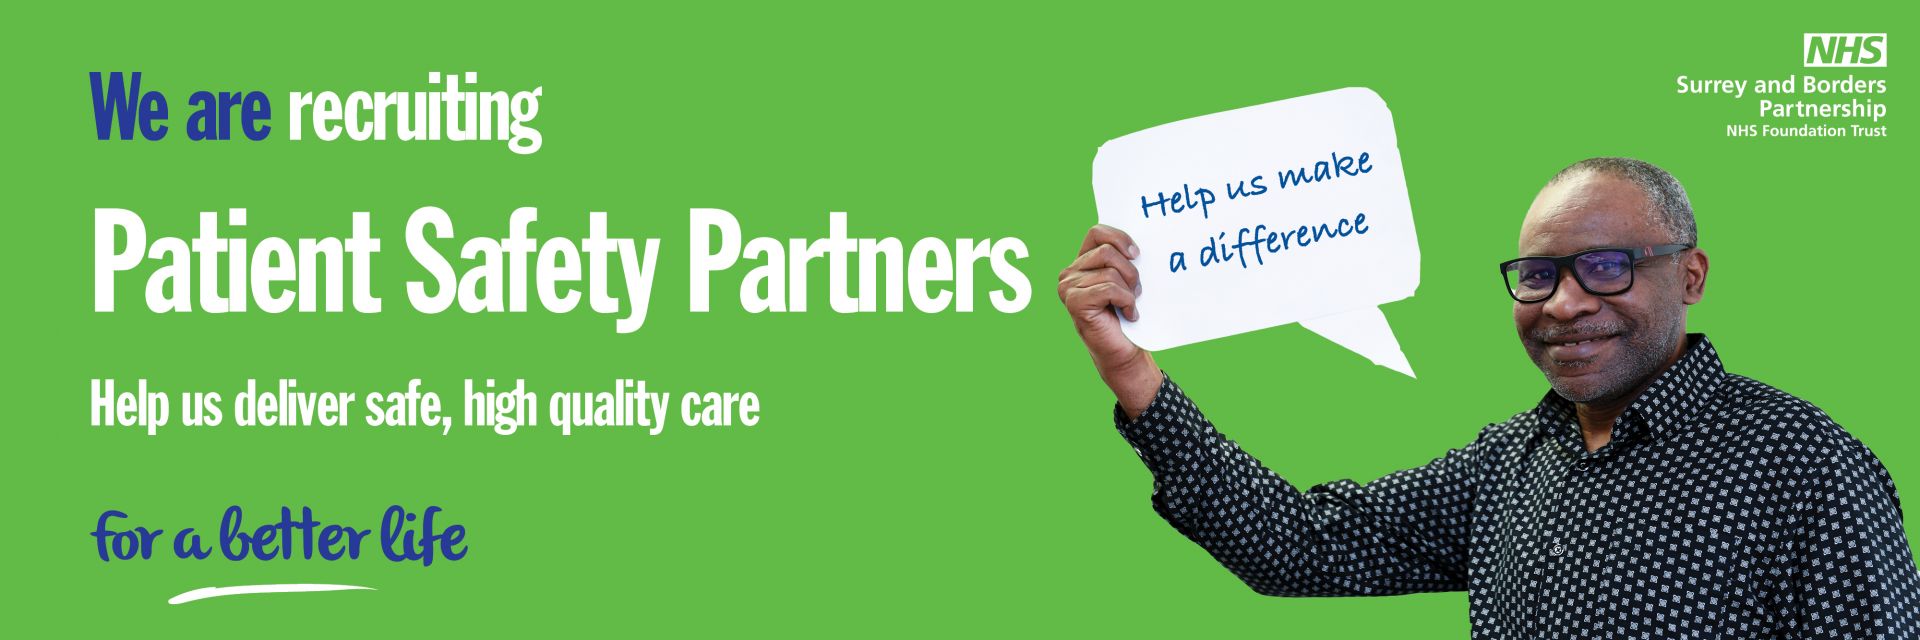 A recruitment banner who read "Join us as a Patient Safety Partner" accompanied by a smiling gentleman.